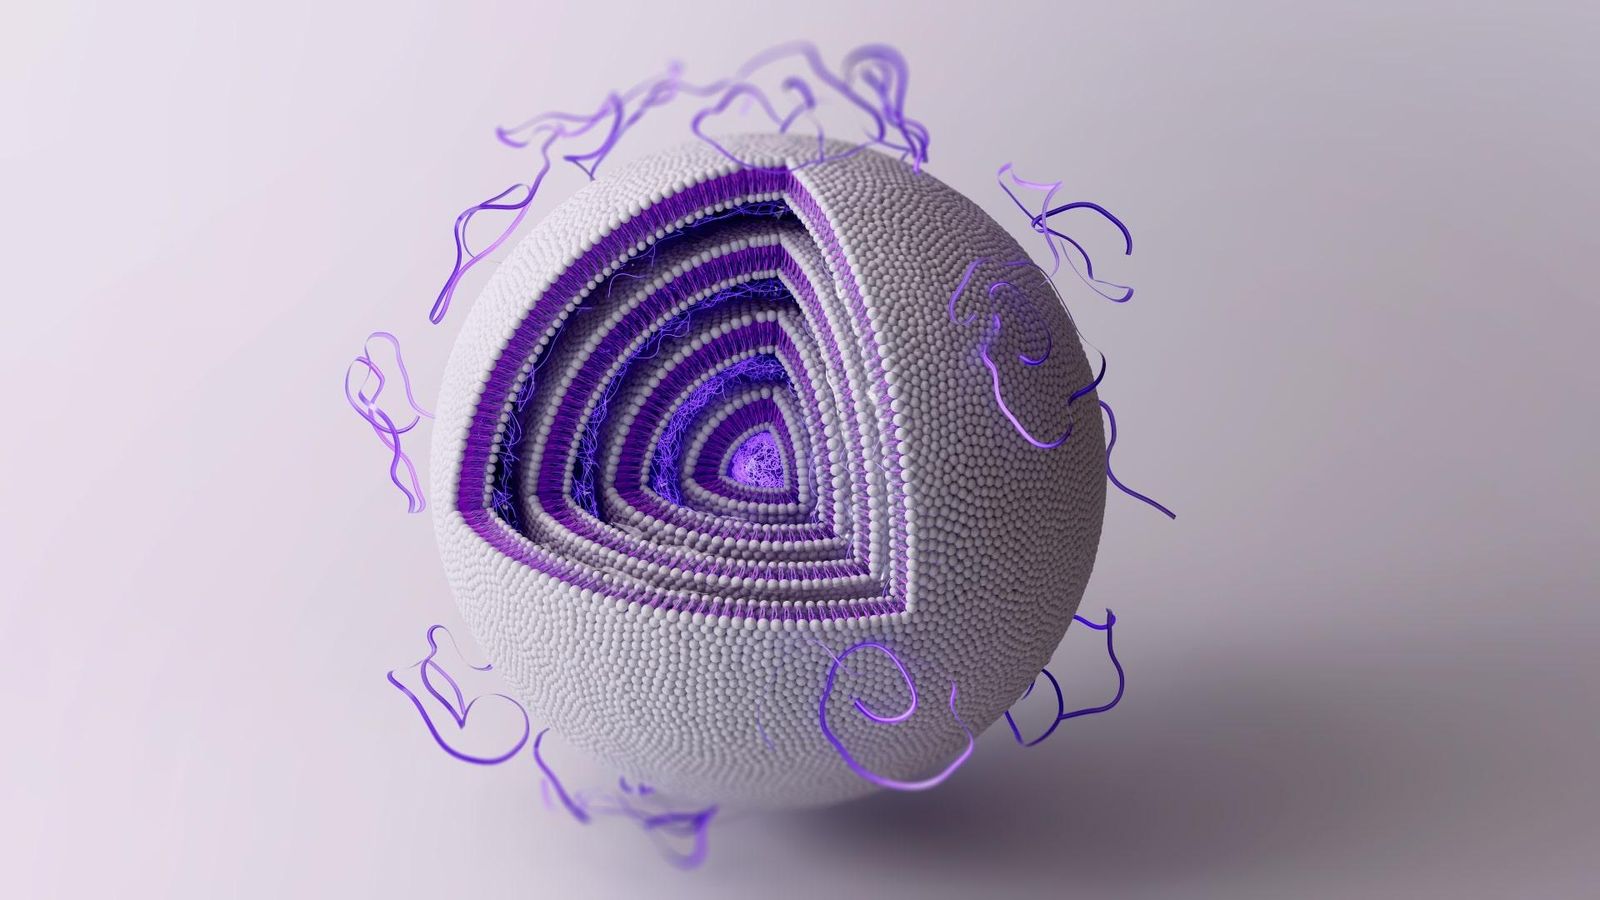 3D illustration of a Lipid Nanoparticle 